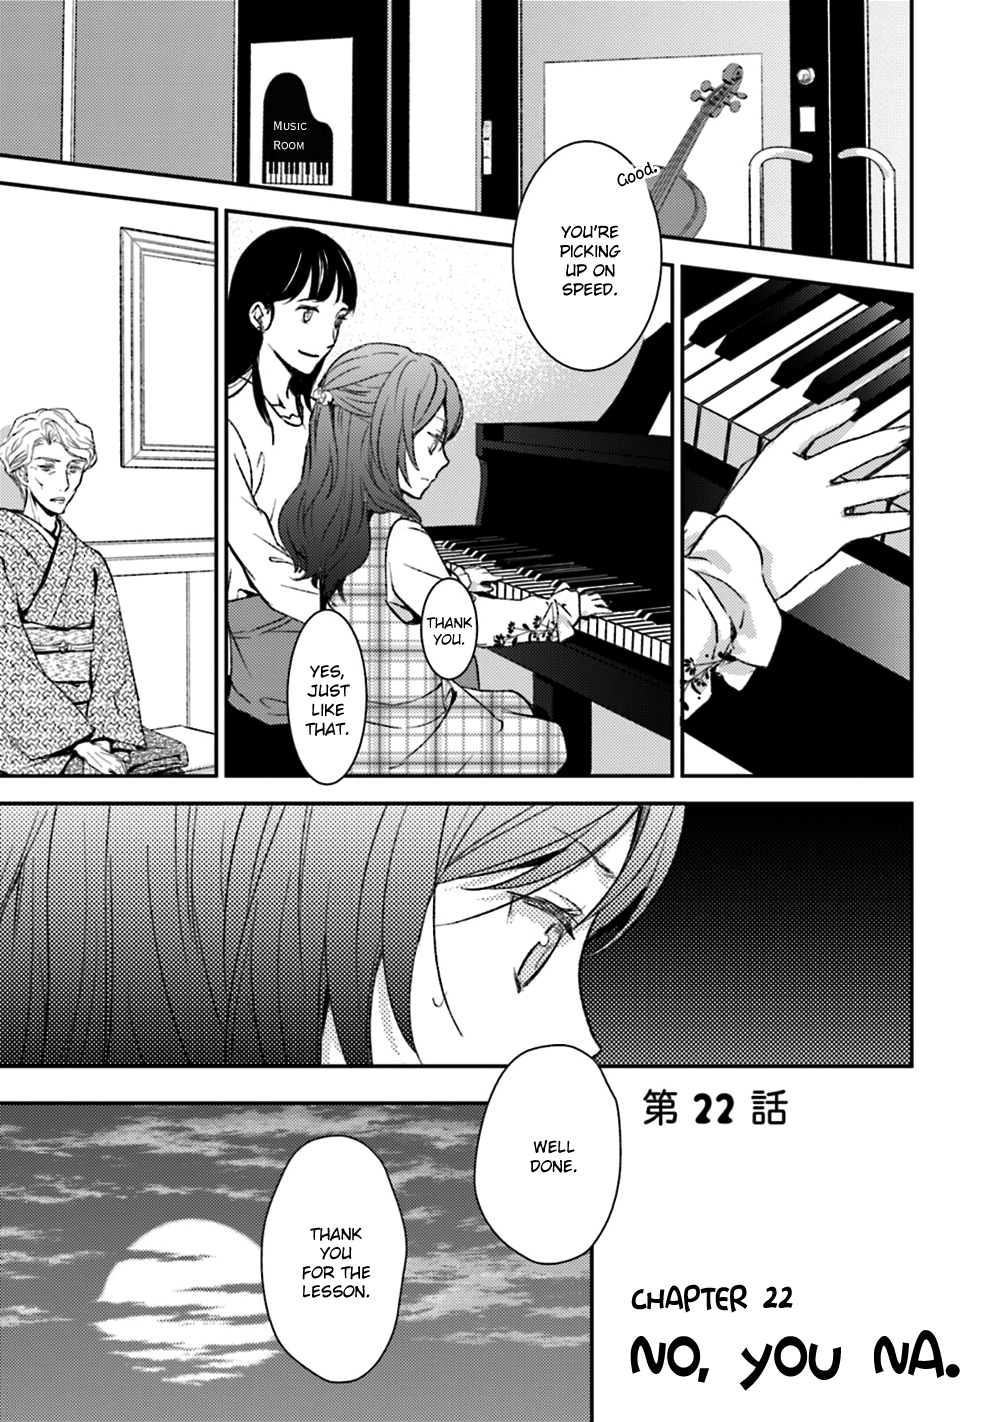 No, You Na. Vol.5 Chapter 22 - Picture 3